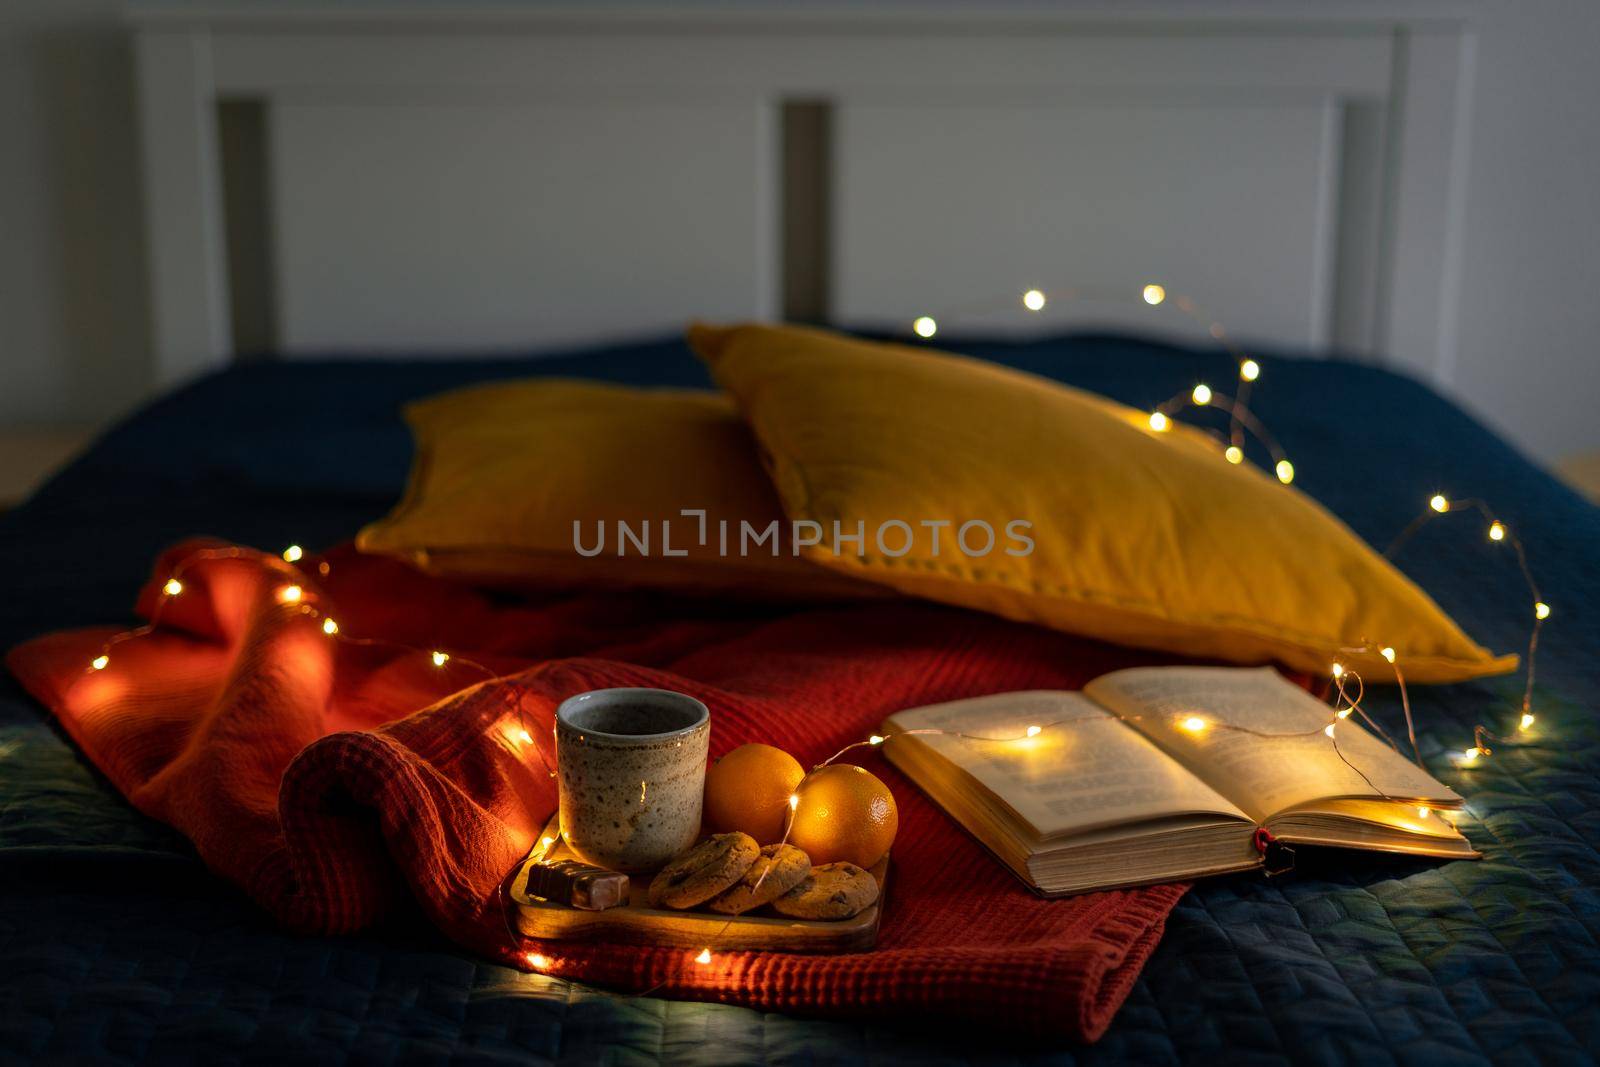 Cozy background for reading book relaxing and reflection. Stay home concept. Christmas decoration with garland lights, pillows and hot drink with cookies on bed. Dark evening twilight in bedroom